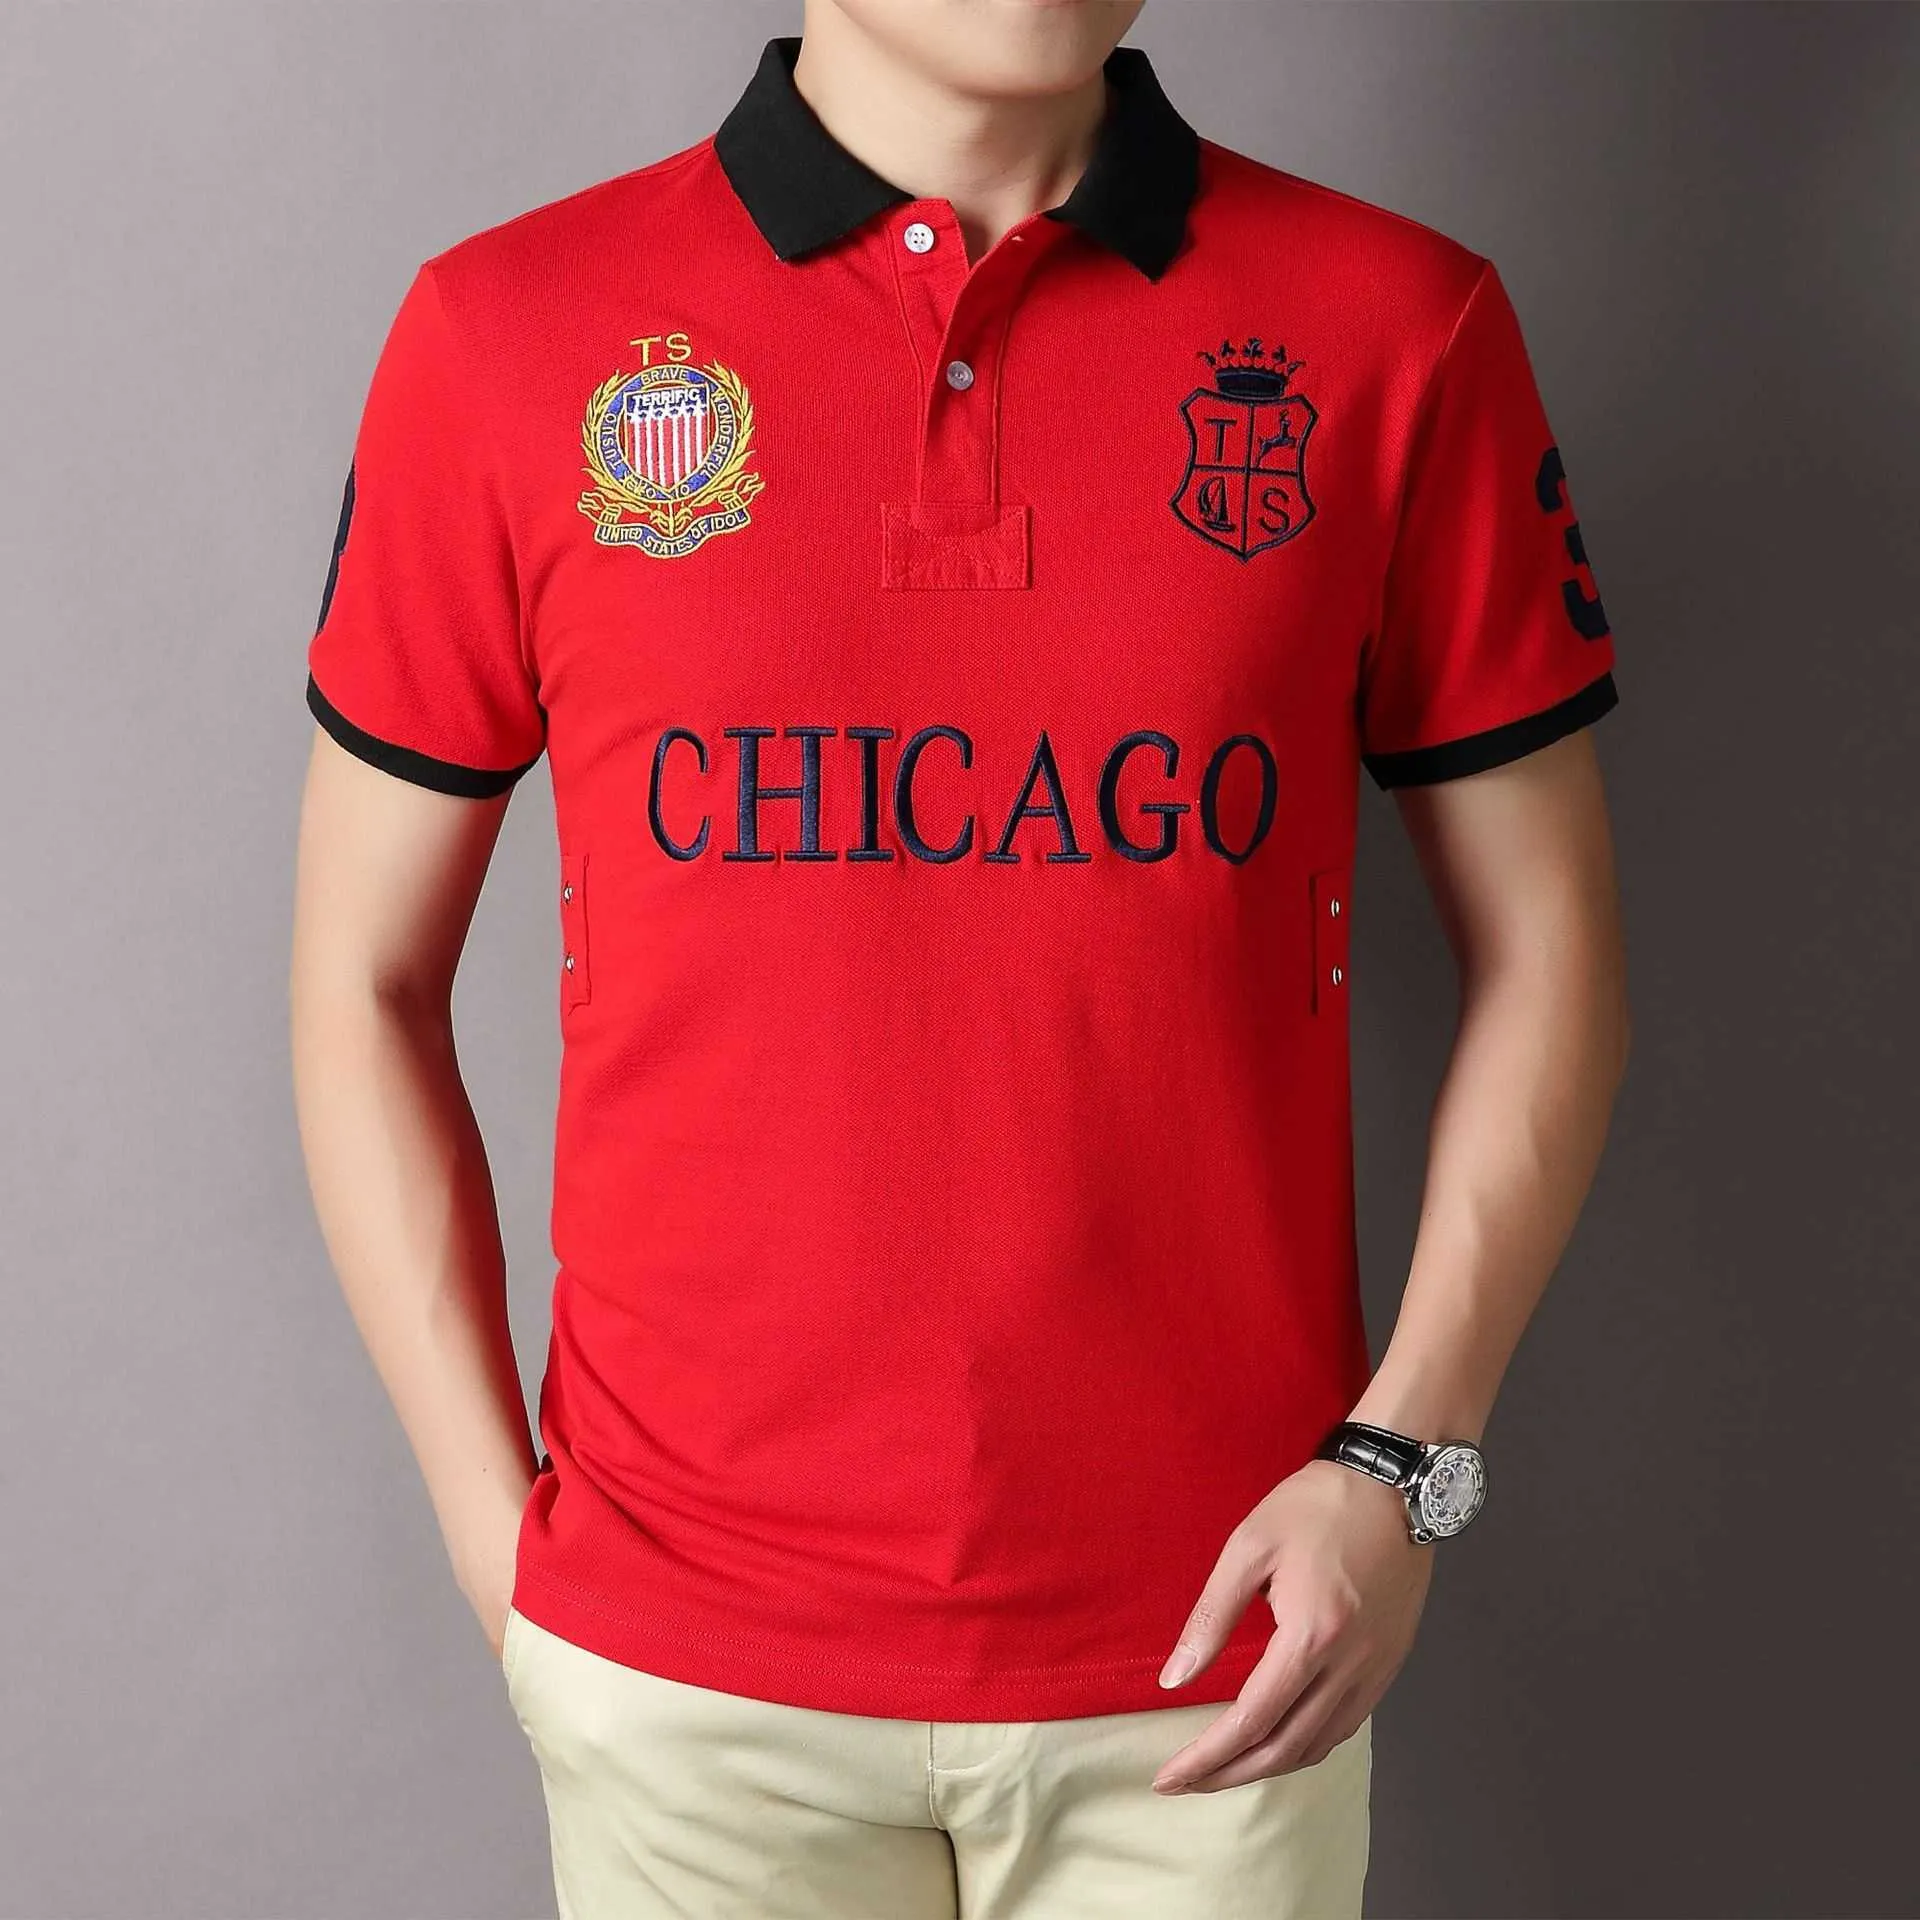 Nieuw poloshirt heren korte mouwen Chicago Royal Casual Sports Color Block Pure Cotton Embroidery Europese maat